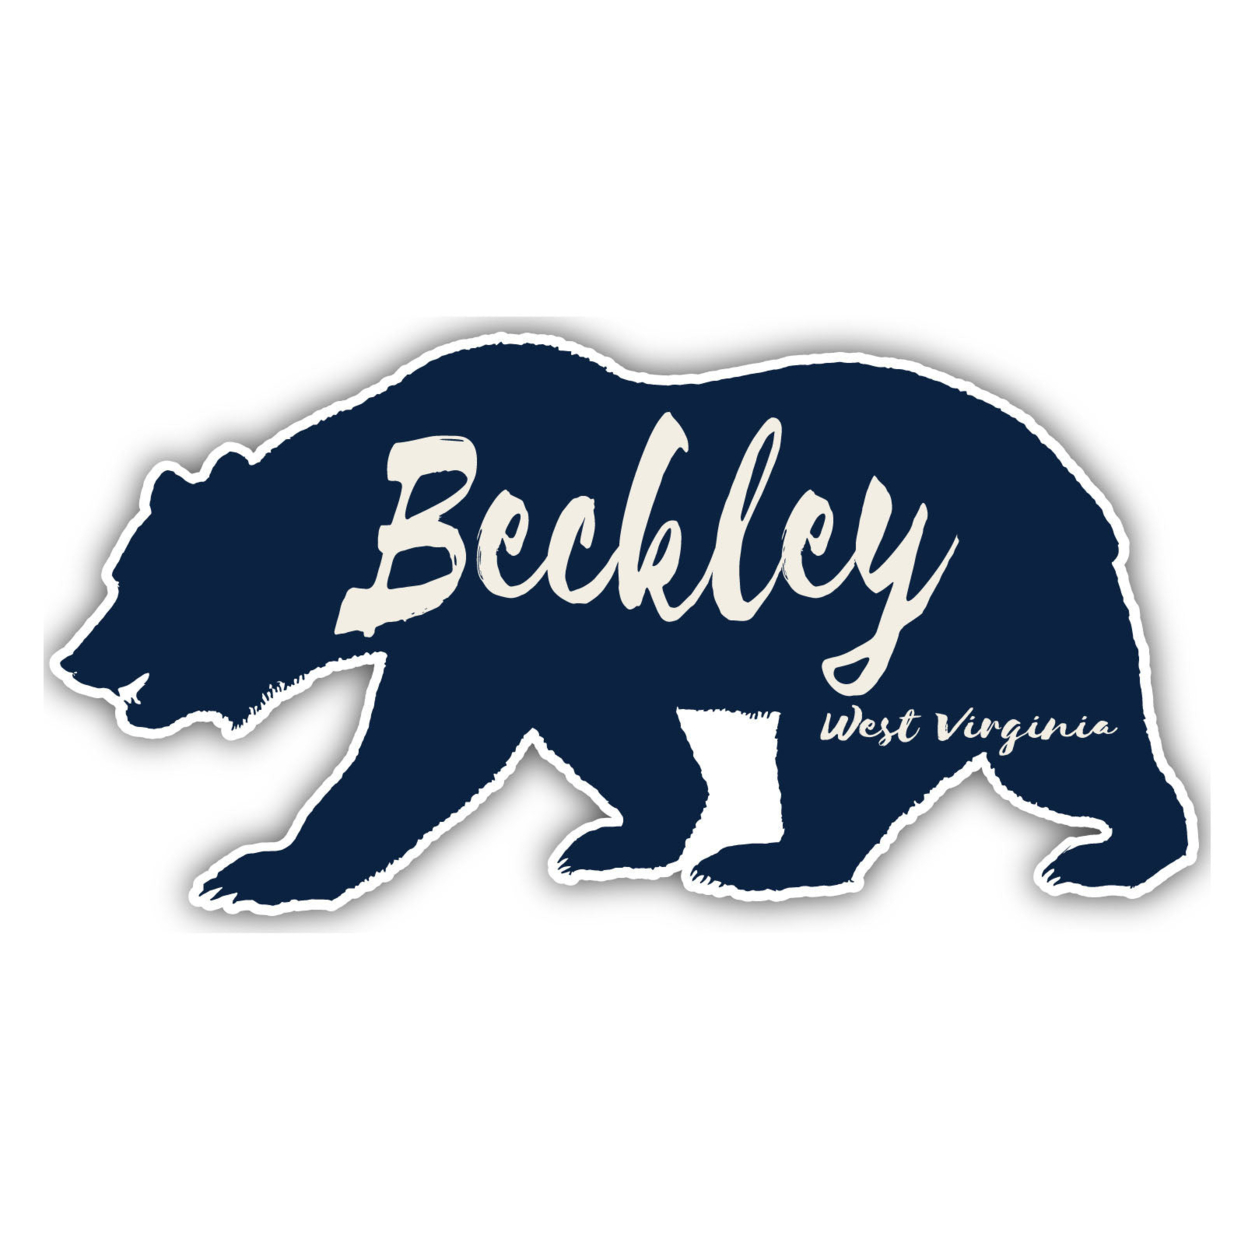 Beckley West Virginia Souvenir Decorative Stickers (Choose Theme And Size) - 4-Pack, 6-Inch, Bear